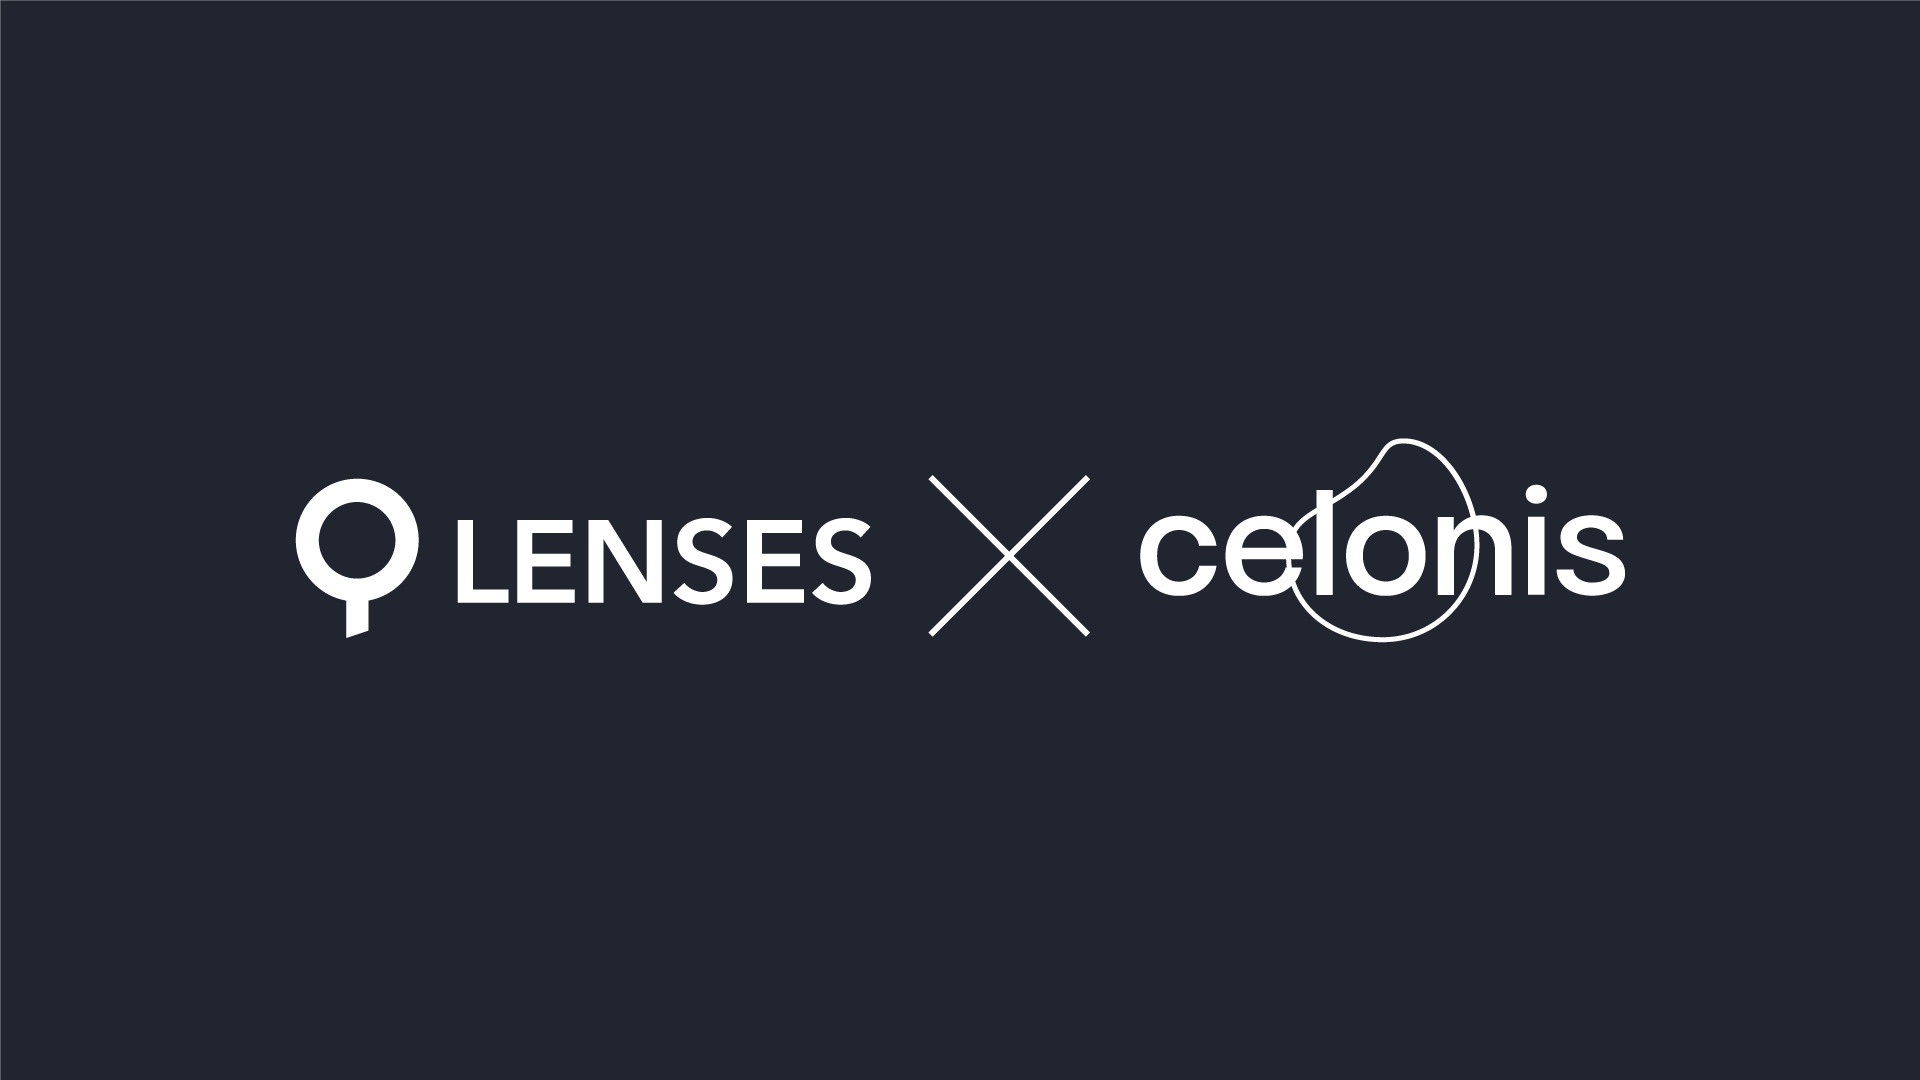 Lenses.io is joining Celonis, the leader in execution management in order together to bring real time streaming data to business execution.